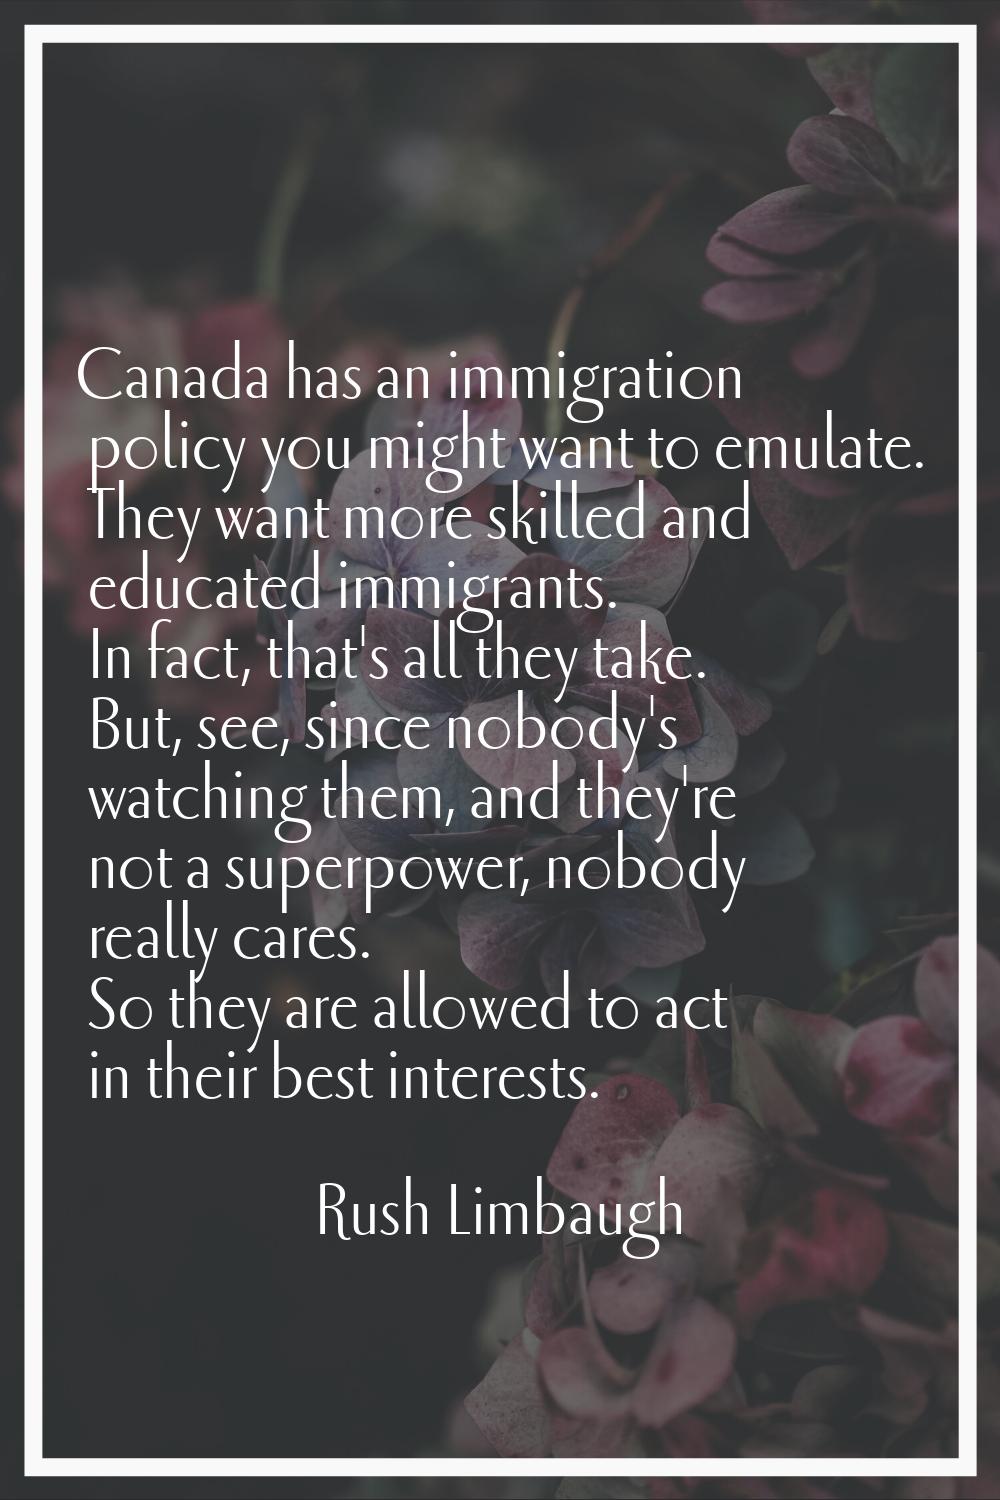 Canada has an immigration policy you might want to emulate. They want more skilled and educated imm